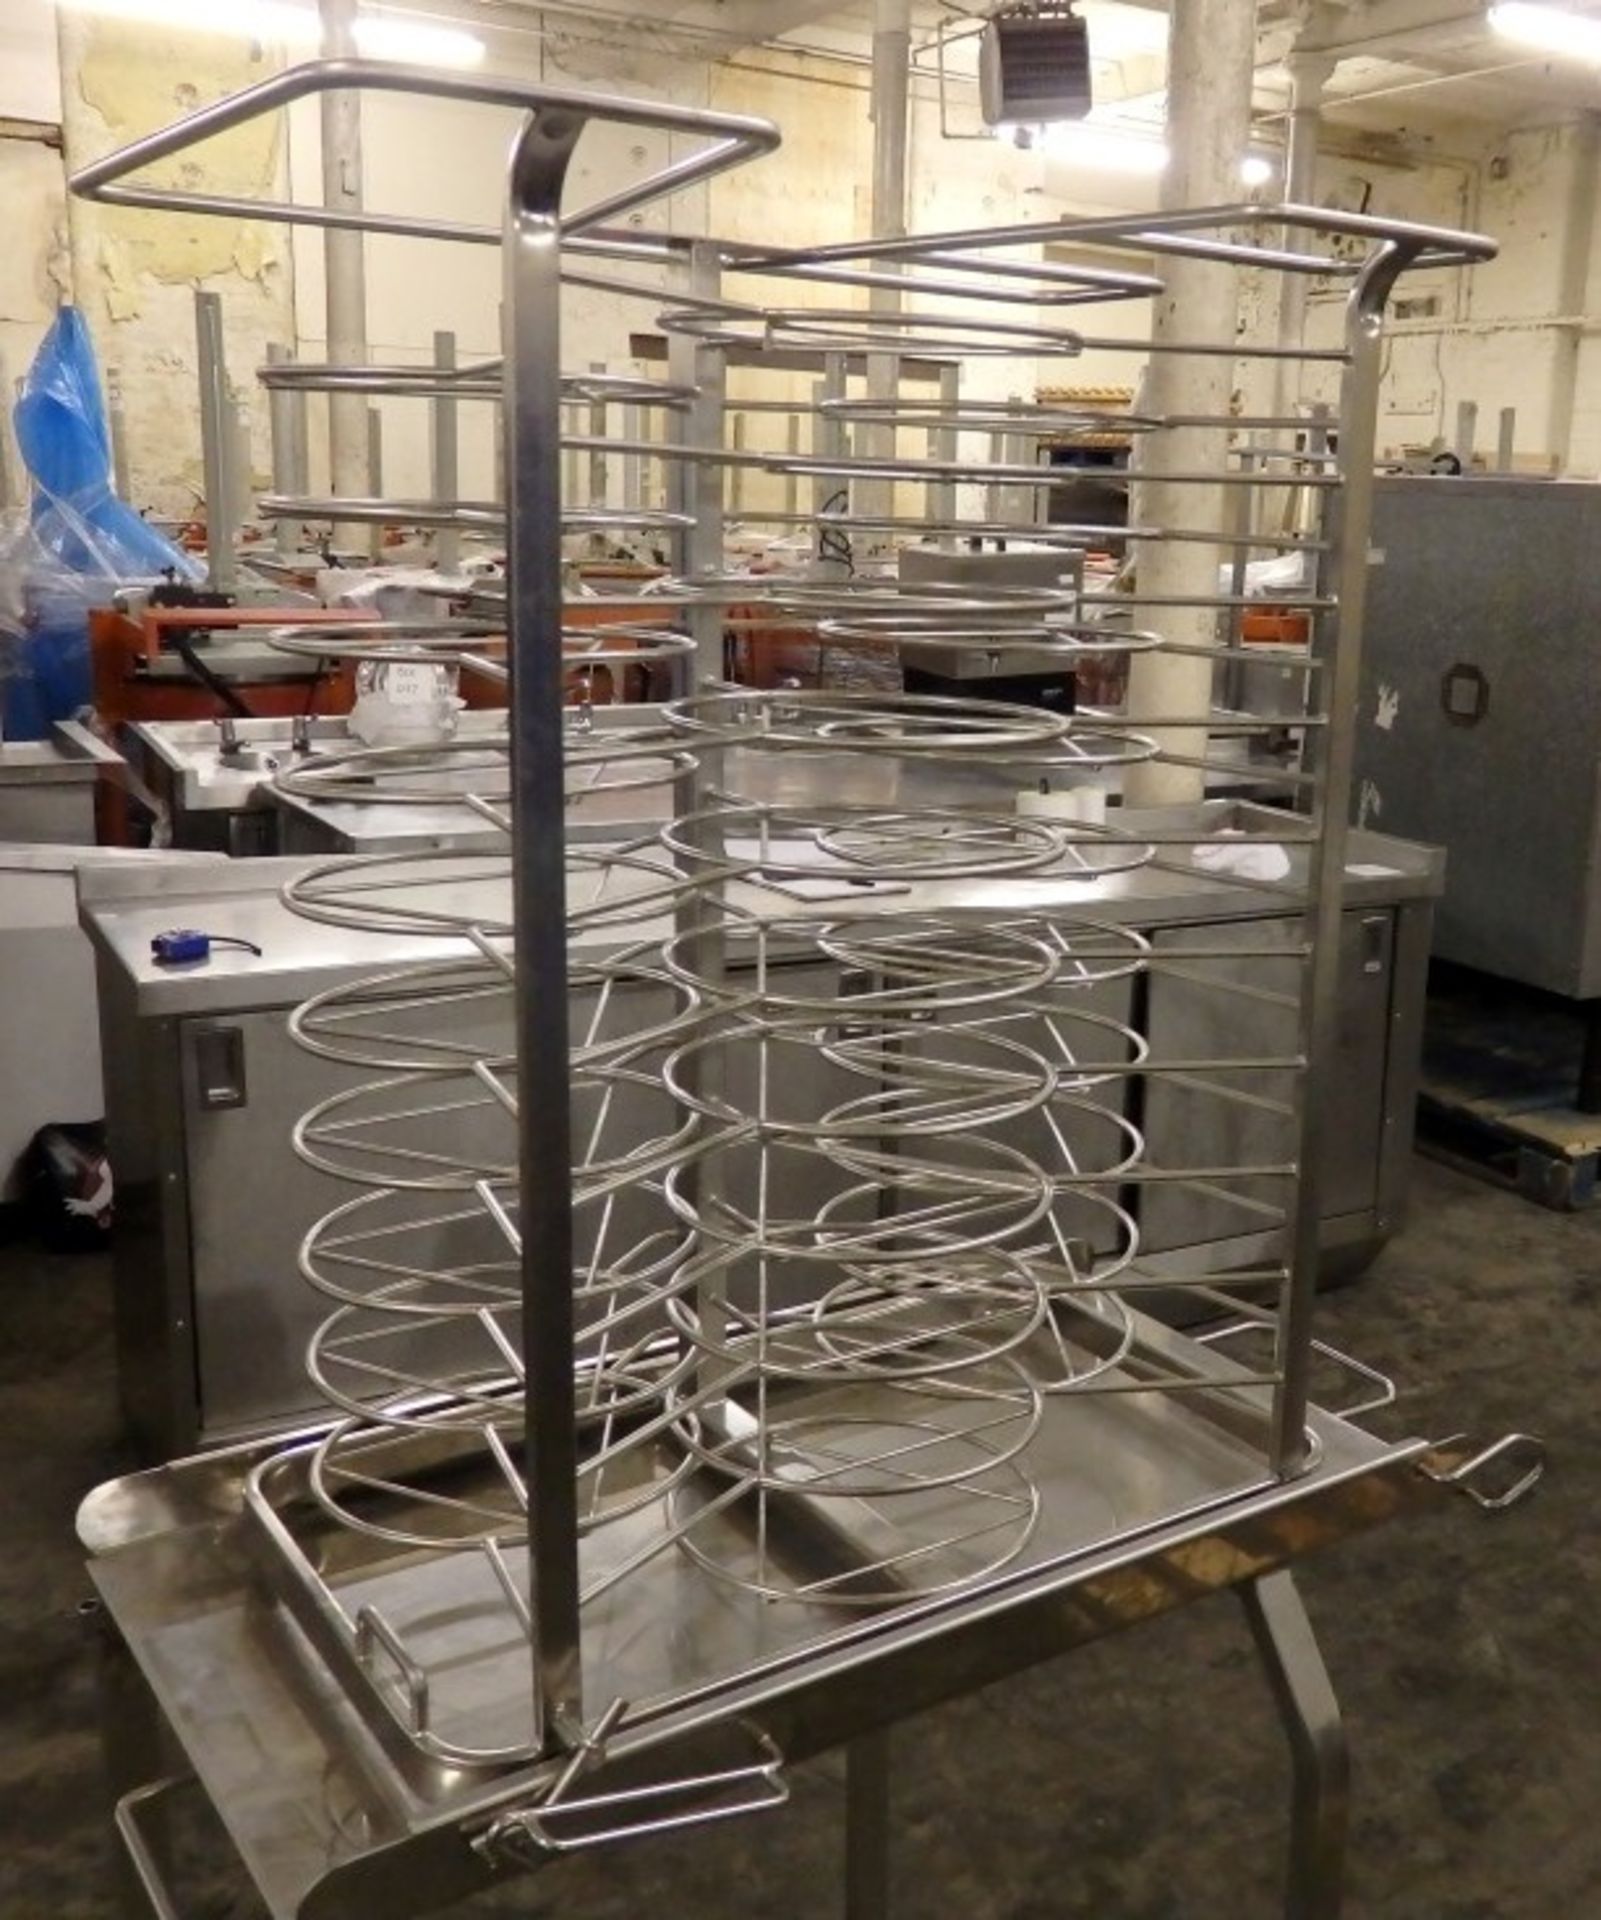 1 x Stainless Steel Plate Rack / Trolley With Thermal Cover - 31 Plate Capacity - Only Used Once - - Image 2 of 4